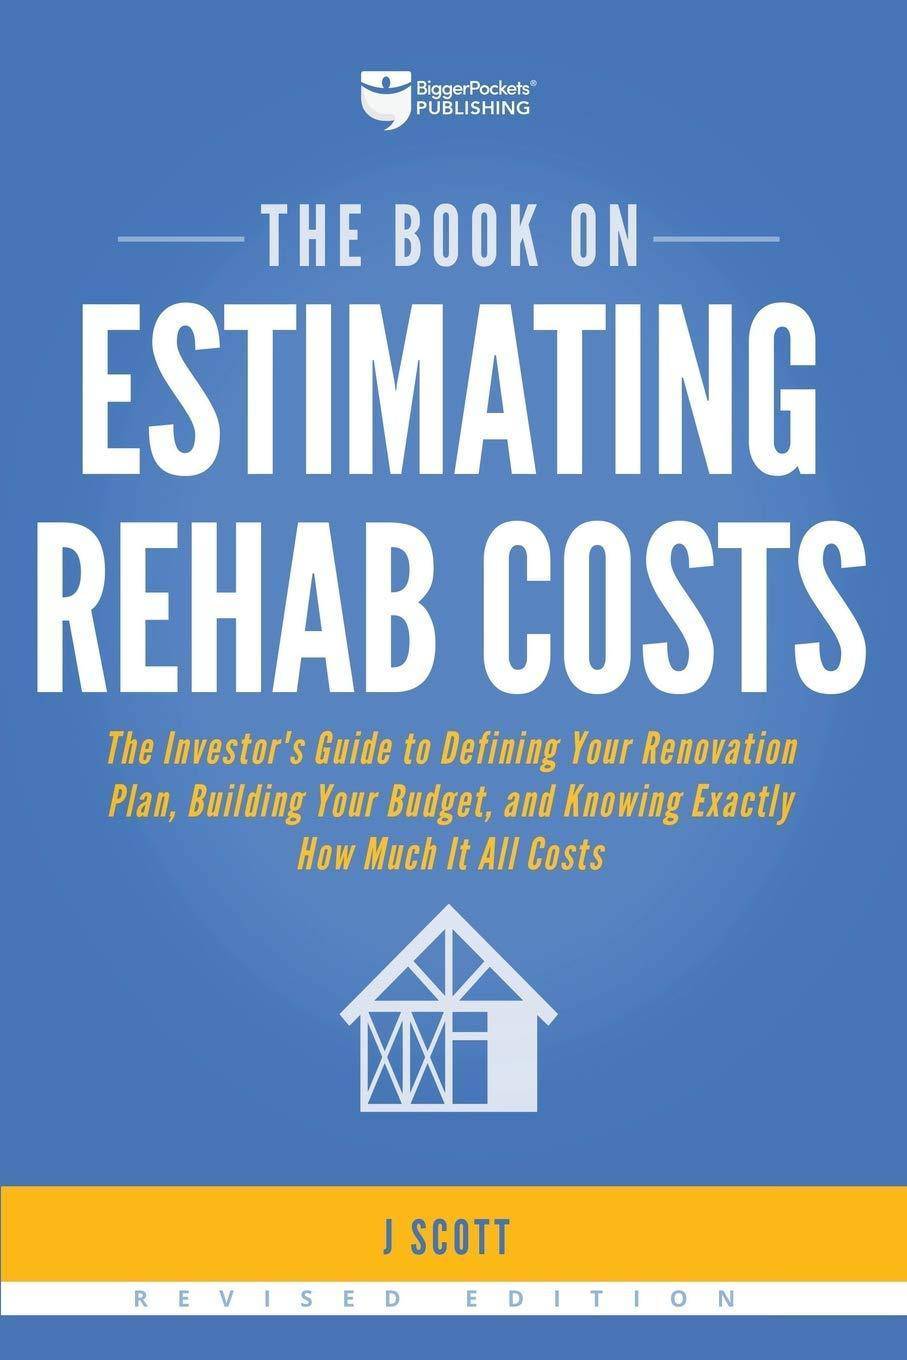 Book on Estimating Rehab Costs: The Investor's Guide to Defining - SureShot Books Publishing LLC